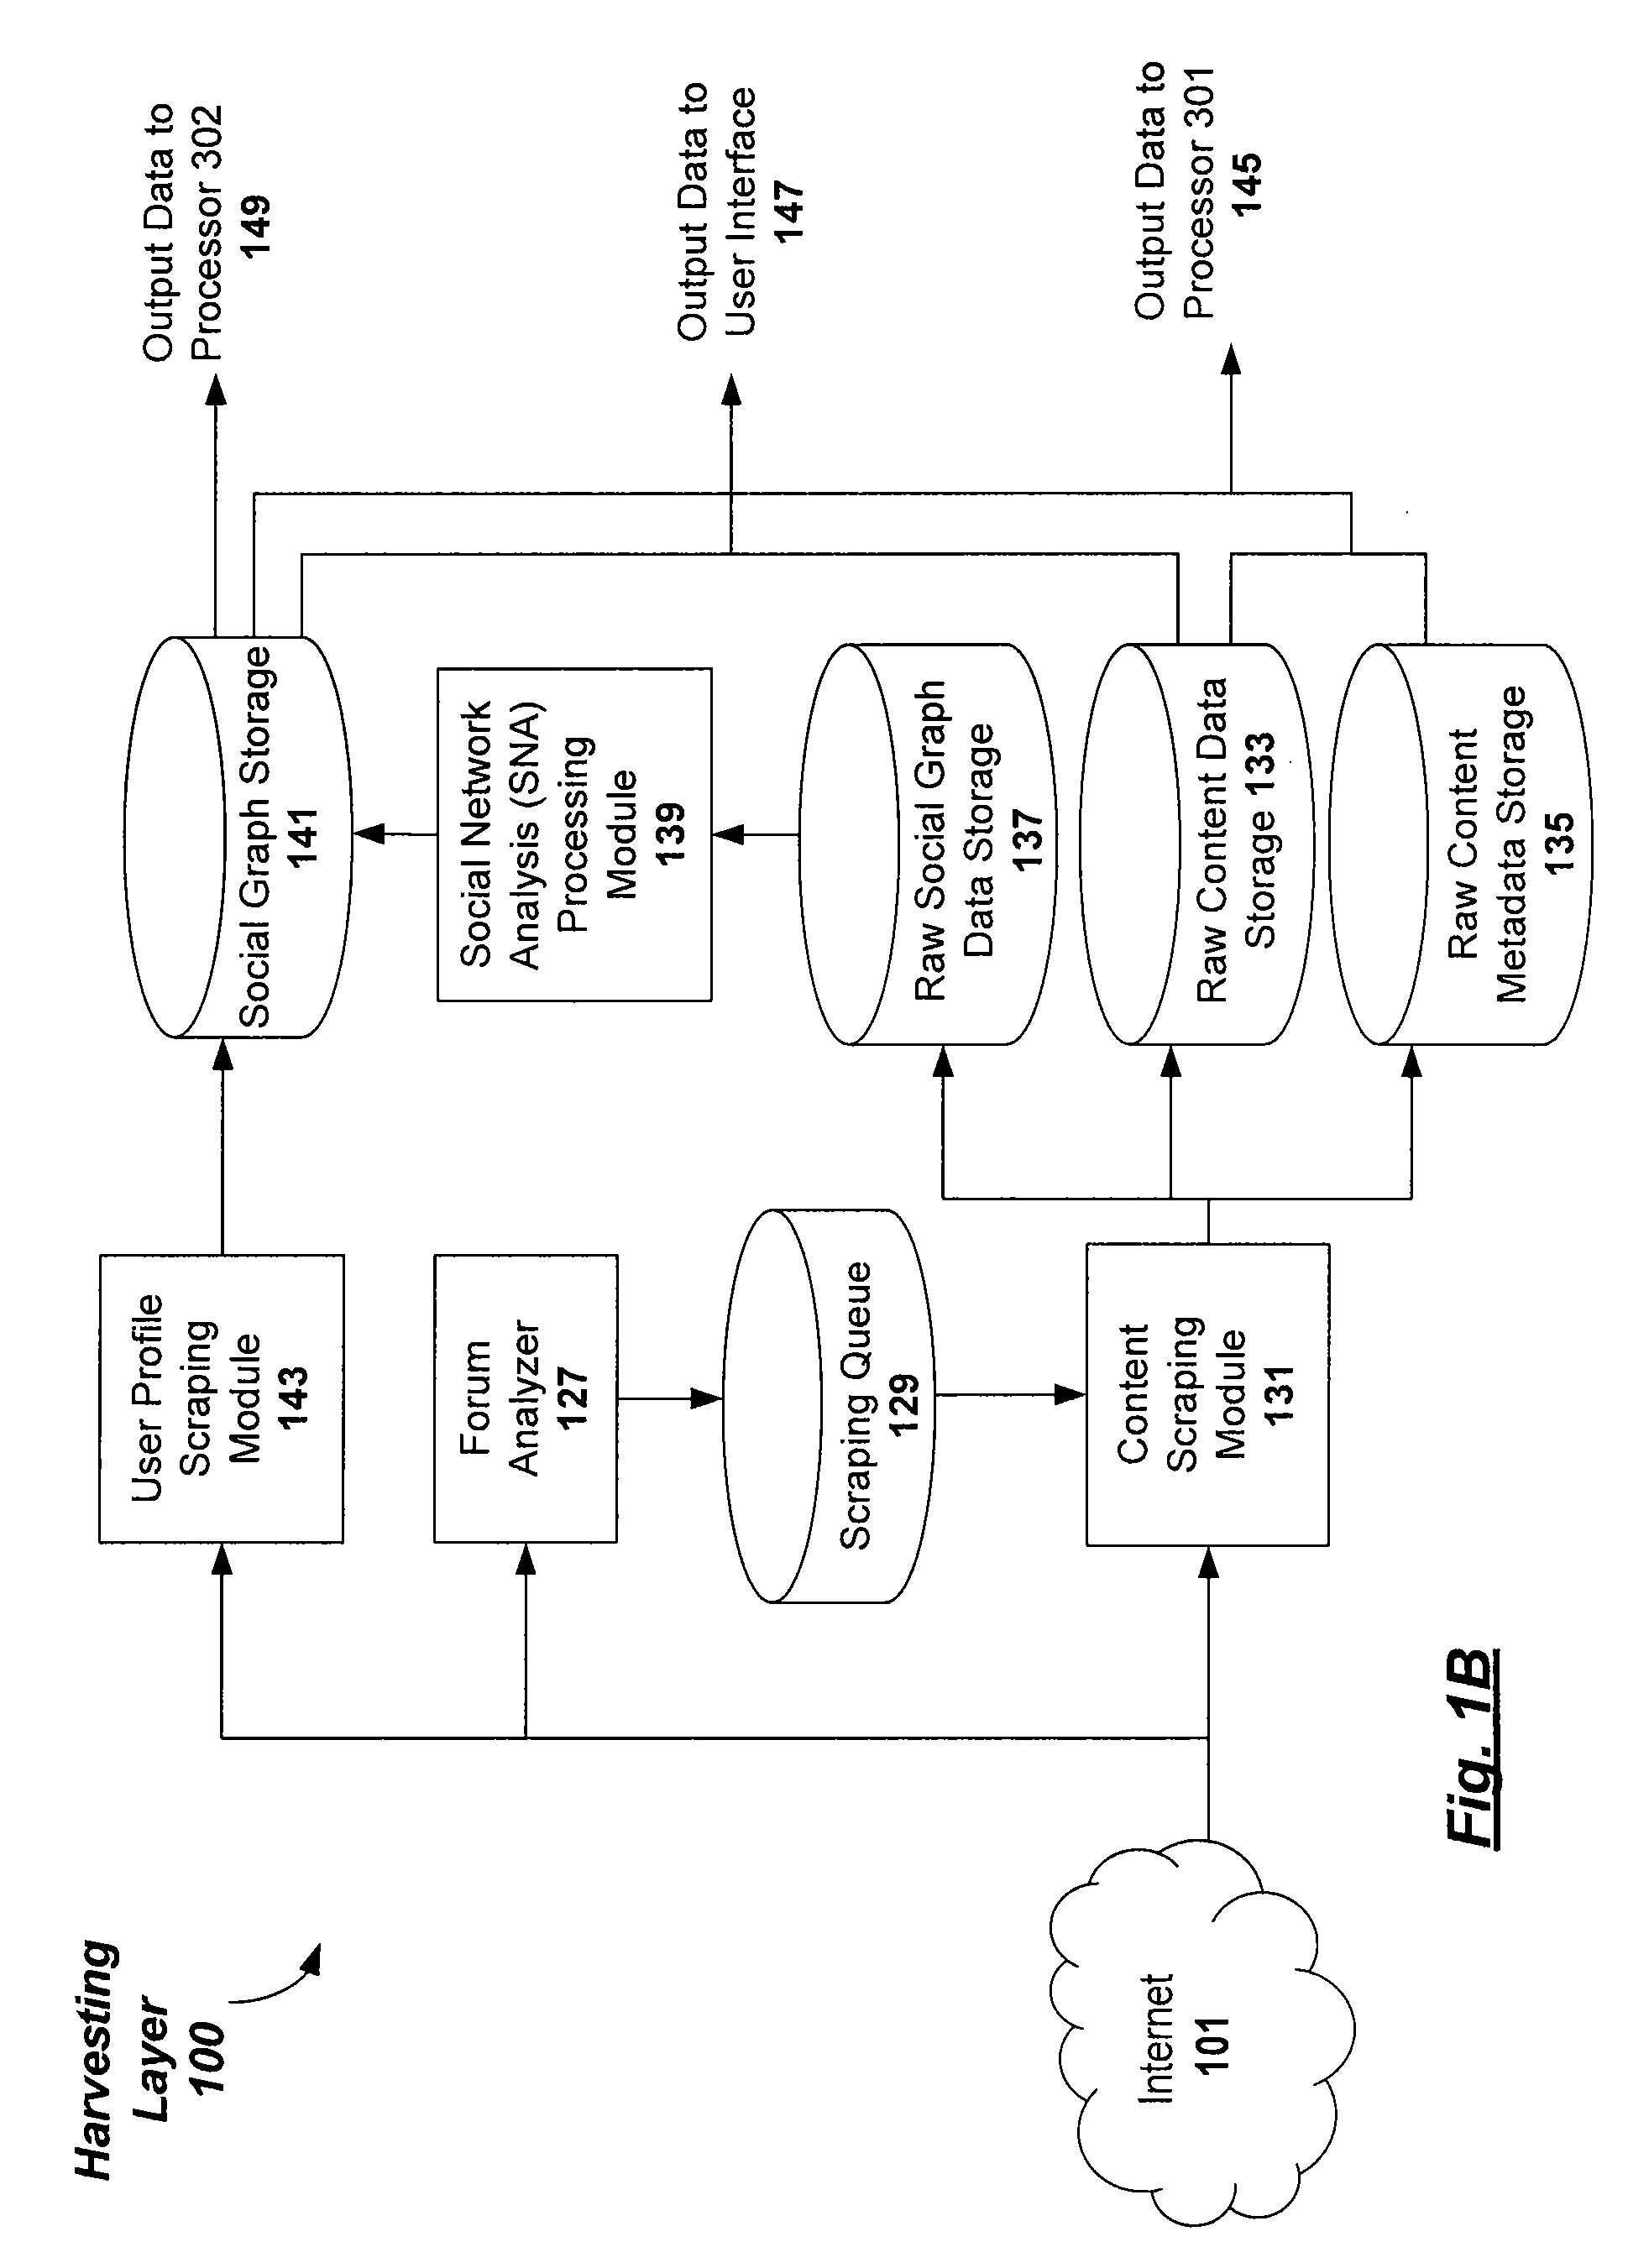 Displaying analytic measurement of online social media content in a graphical user interface